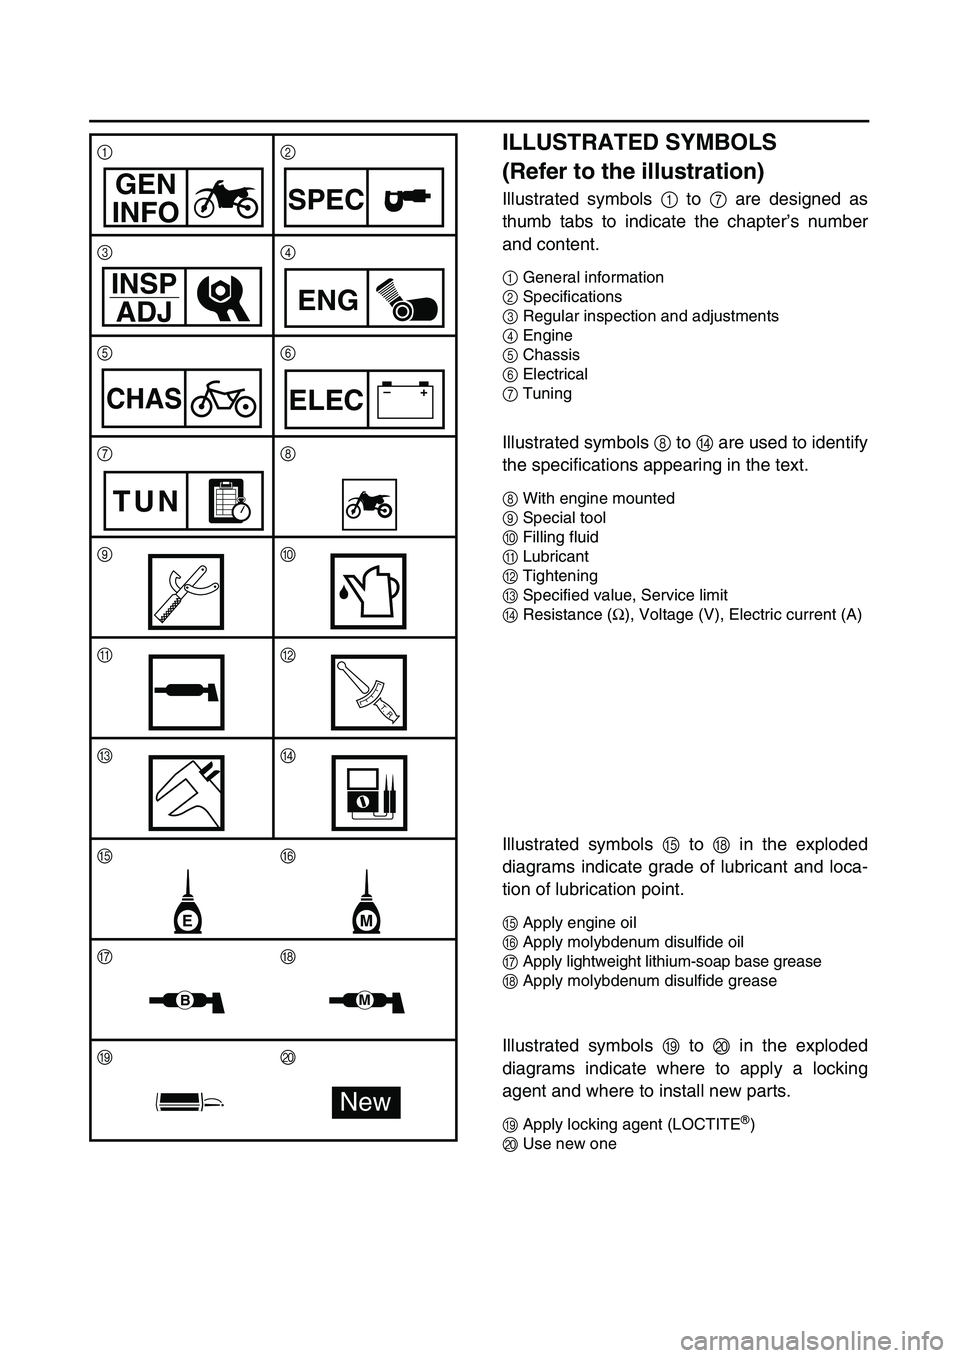 YAMAHA WR 426F 2002  Betriebsanleitungen (in German)  
ILLUSTRATED SYMBOLS 
(Refer to the illustration) 
Illustrated symbols   
1  
 to   
7  
 are designed as
thumb tabs to indicate the chapter’s number
and content. 
1  
General information  
2  
Spe